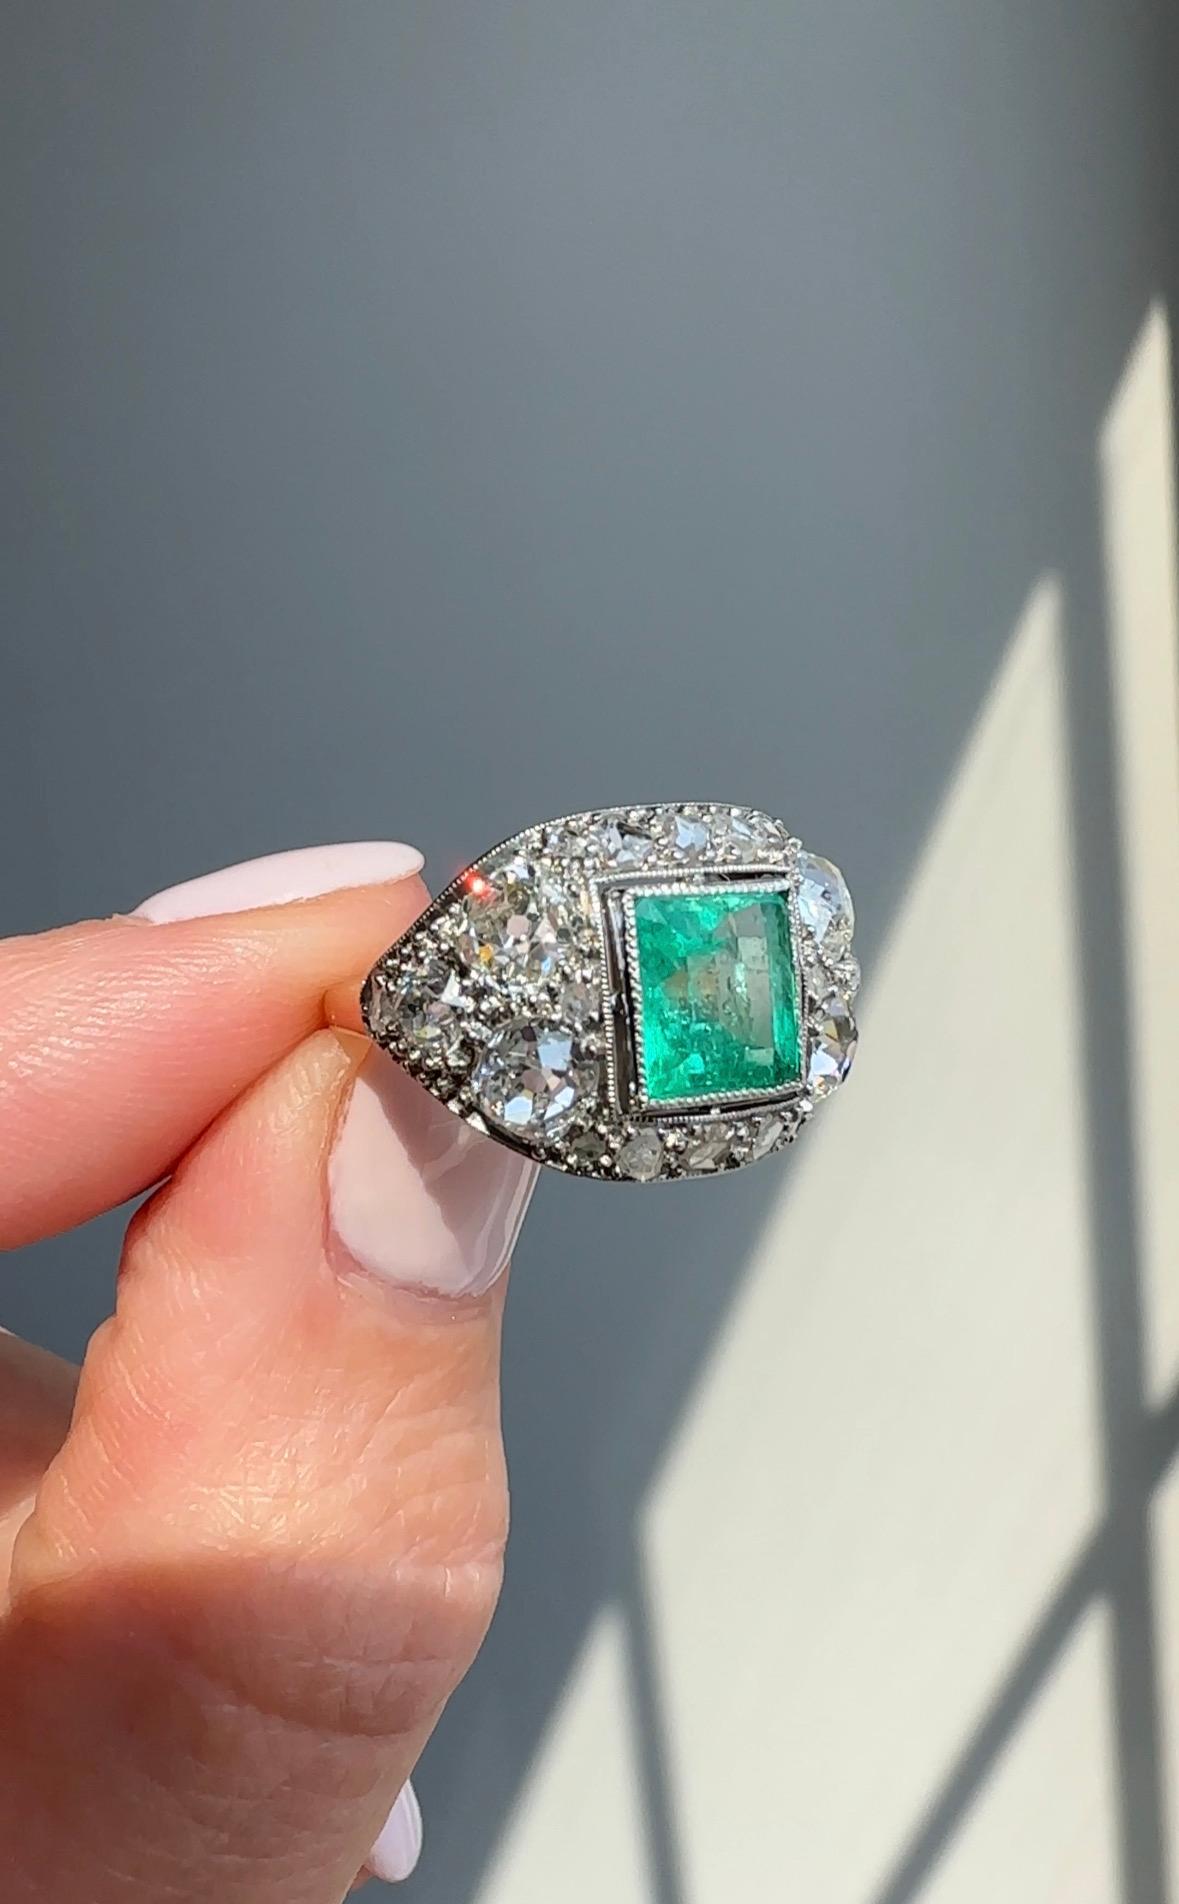 This stunning finger hugging Art Deco ring centers on a gemmy square-shaped Colombian emerald, weighing 1.7 carats, that glows from within 1.65 carats of chunky old mine cut diamonds, set in platinum and 18K yellow gold. Exceptionally lovely. This